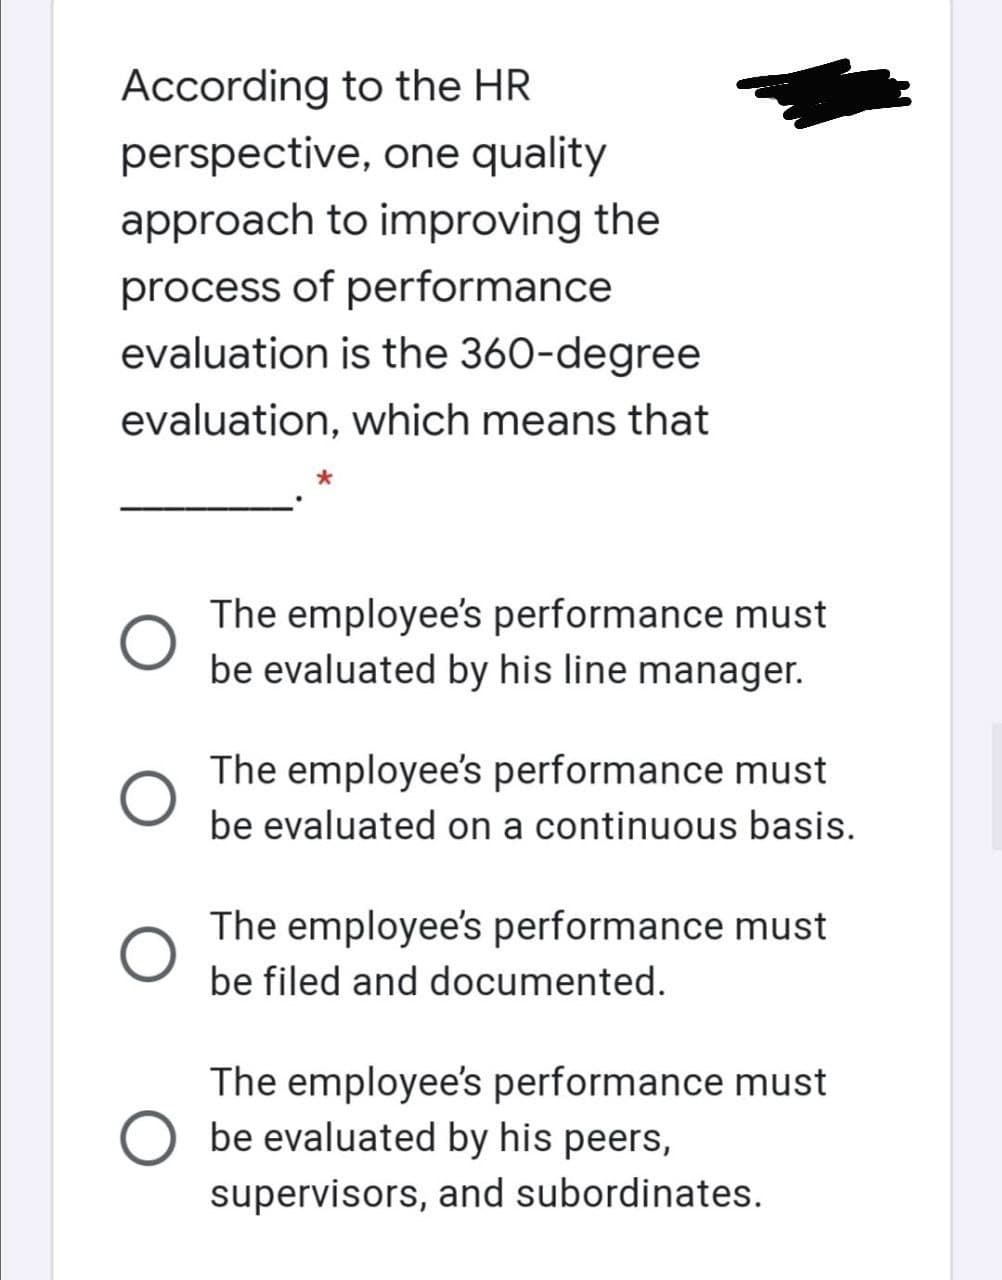 According to the HR
perspective, one quality
approach to improving the
process of performance
evaluation is the 360-degree
evaluation, which means that
The employee's performance must
be evaluated by his line manager.
The employee's performance must
be evaluated on a continuous basis.
The employee's performance must
be filed and documented.
The employee's performance must
be evaluated by his peers,
supervisors, and subordinates.
